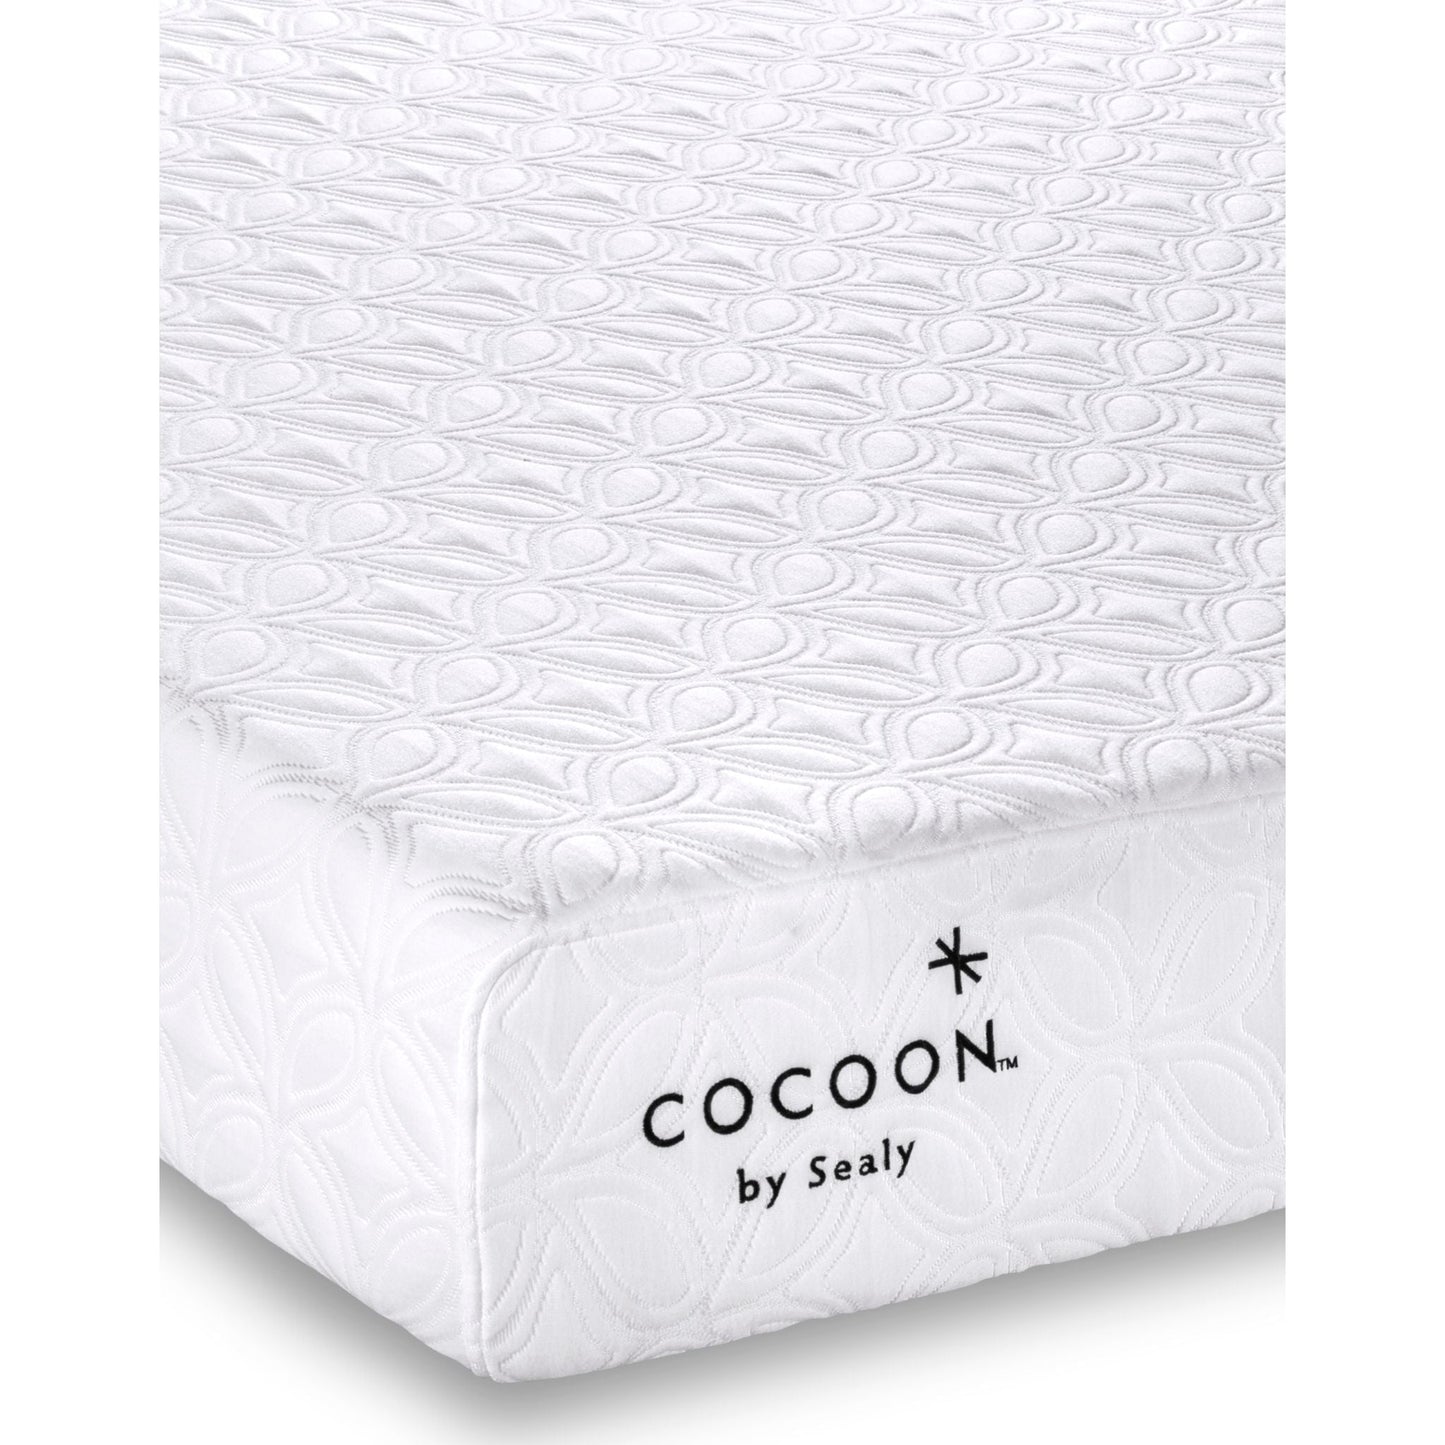 Sealy Cocoon by Sealy Essentials 8" Medium Full Mattress